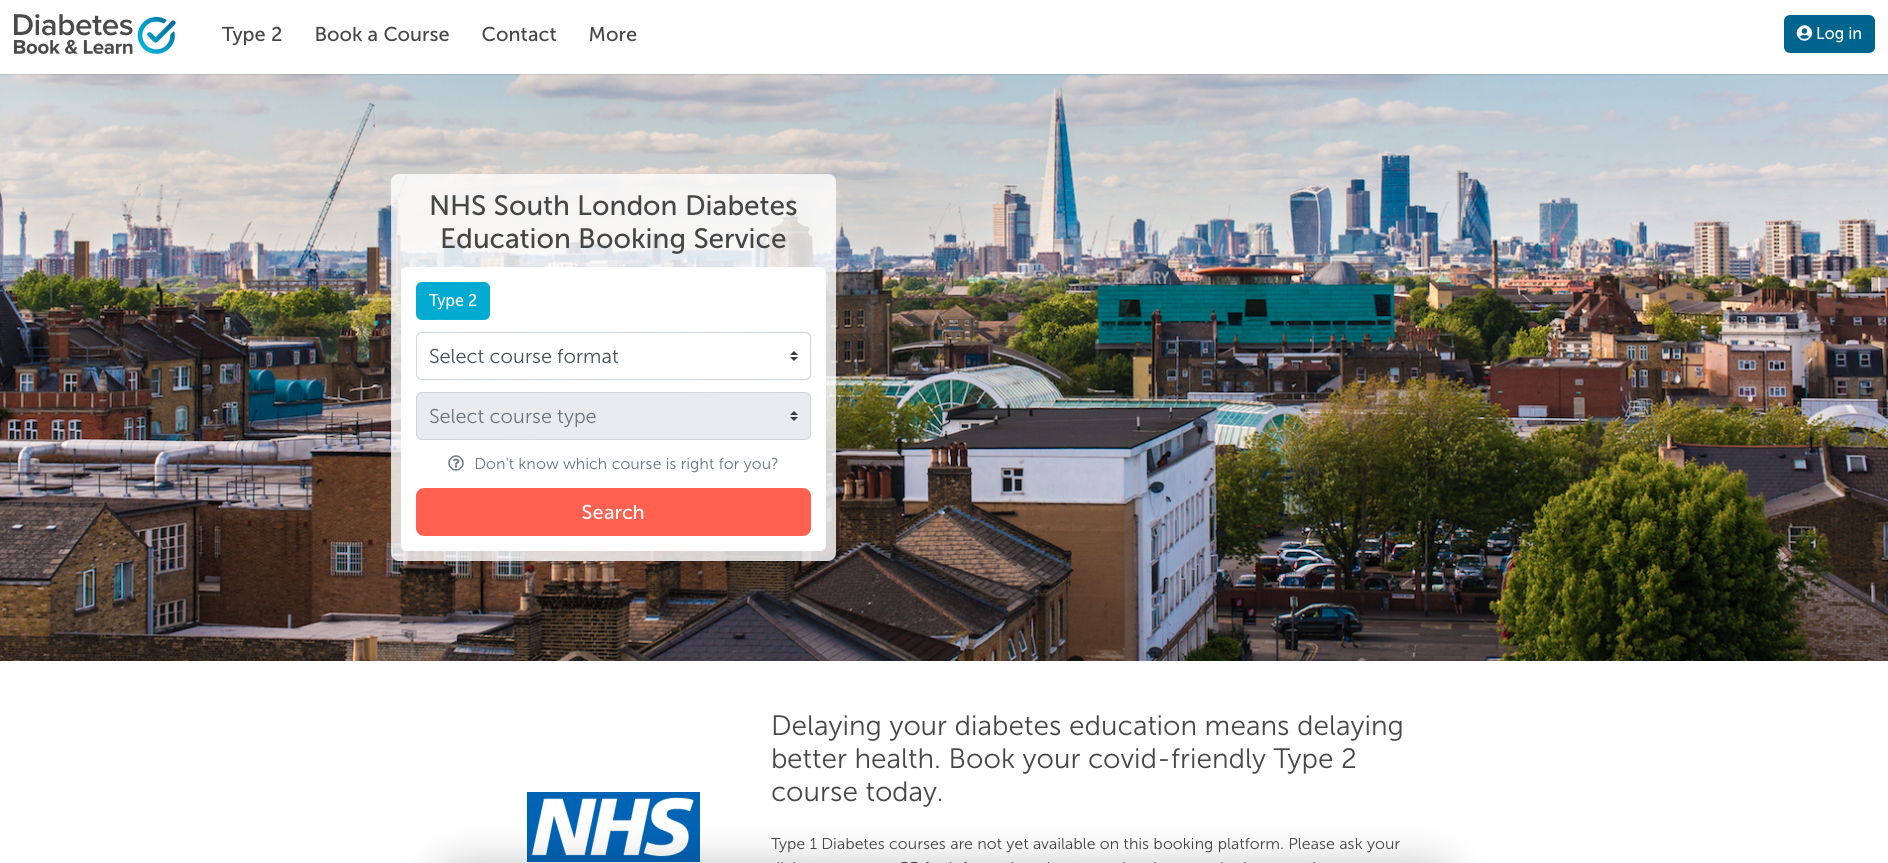 Screenshot of diabetes book and learn homepage. Large header image of South London overlaid with a search box. Main text reads: delaying your diabetes education means delaying better health. Book your covid-friendly type 2 course today.